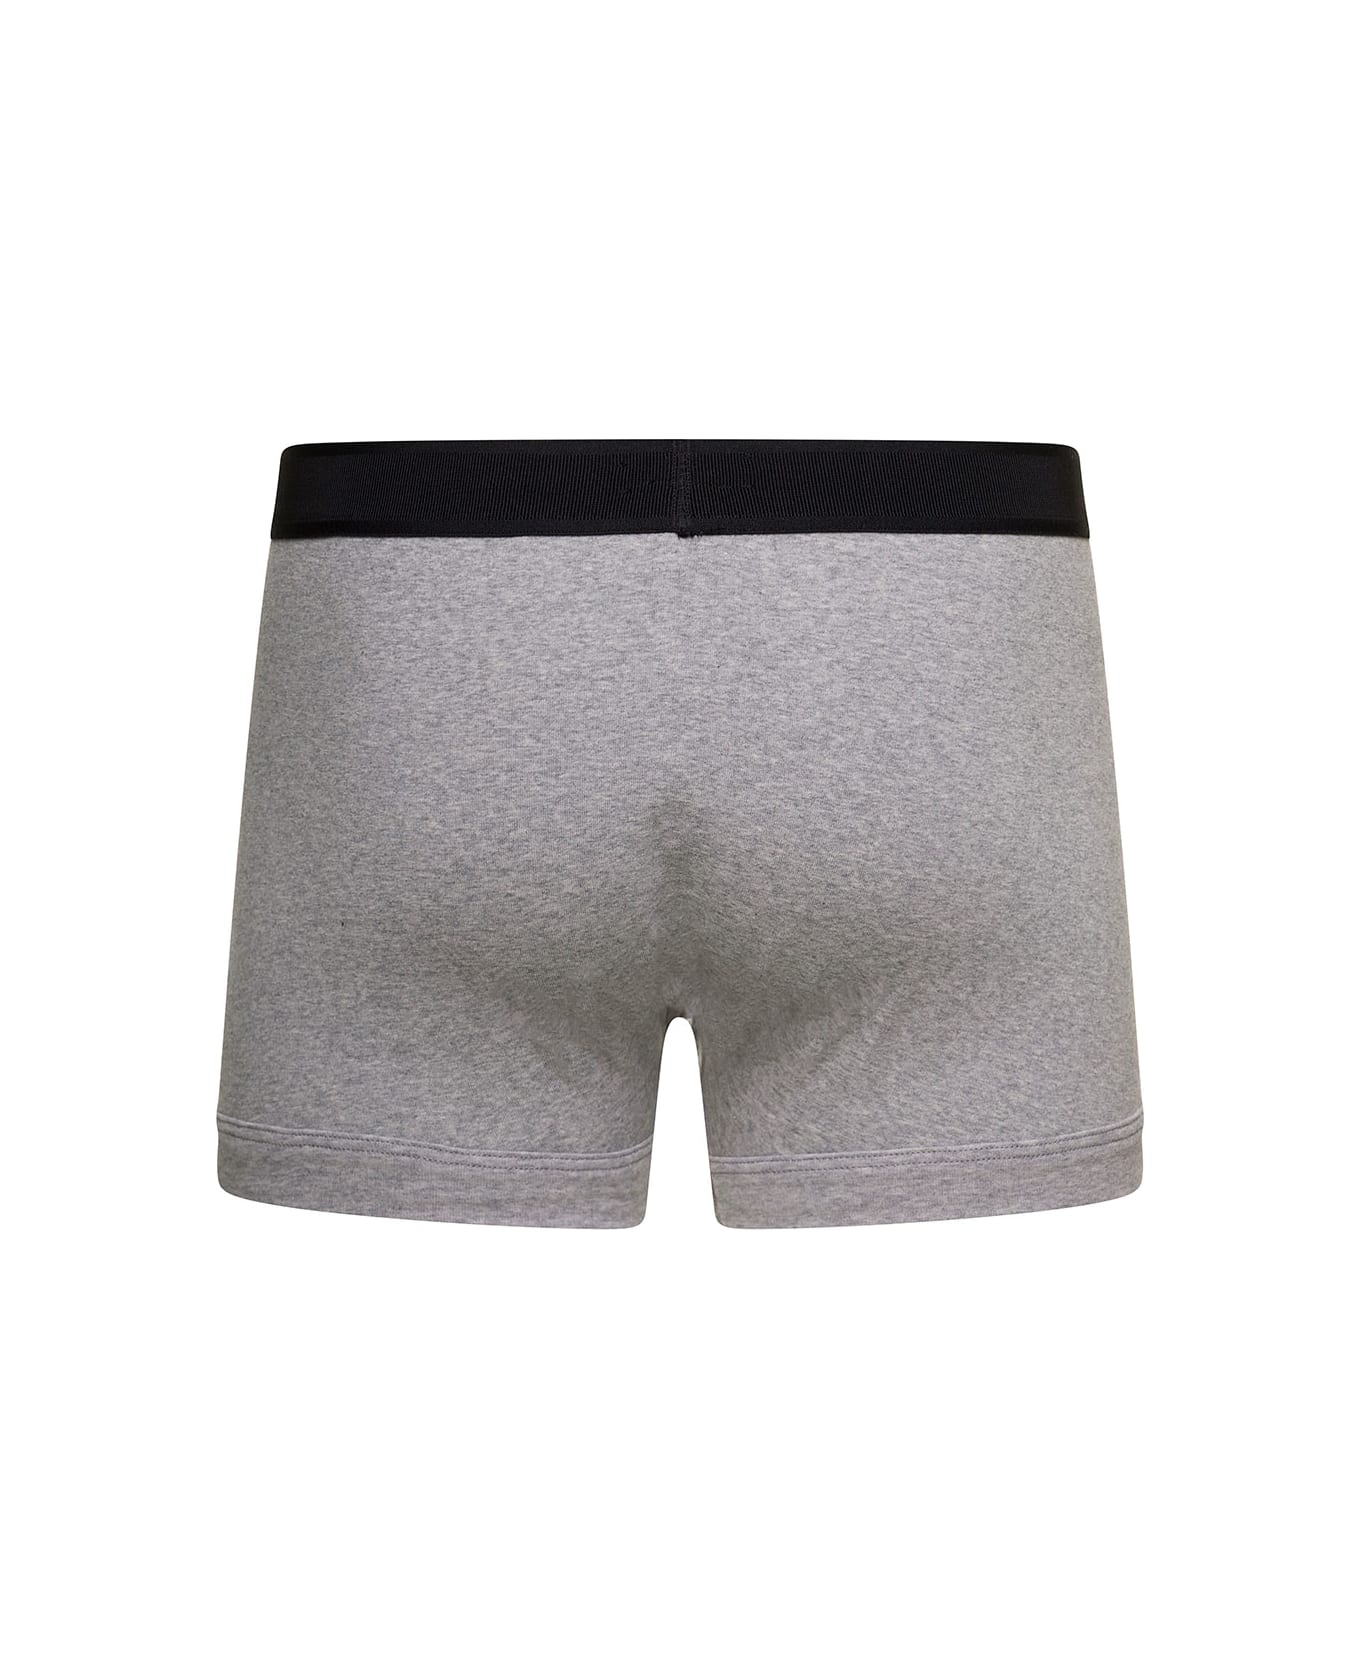 Tom Ford Grey Boxer Brief With Elasticated Logged Waistband In Cotton Stretch Man - Grey